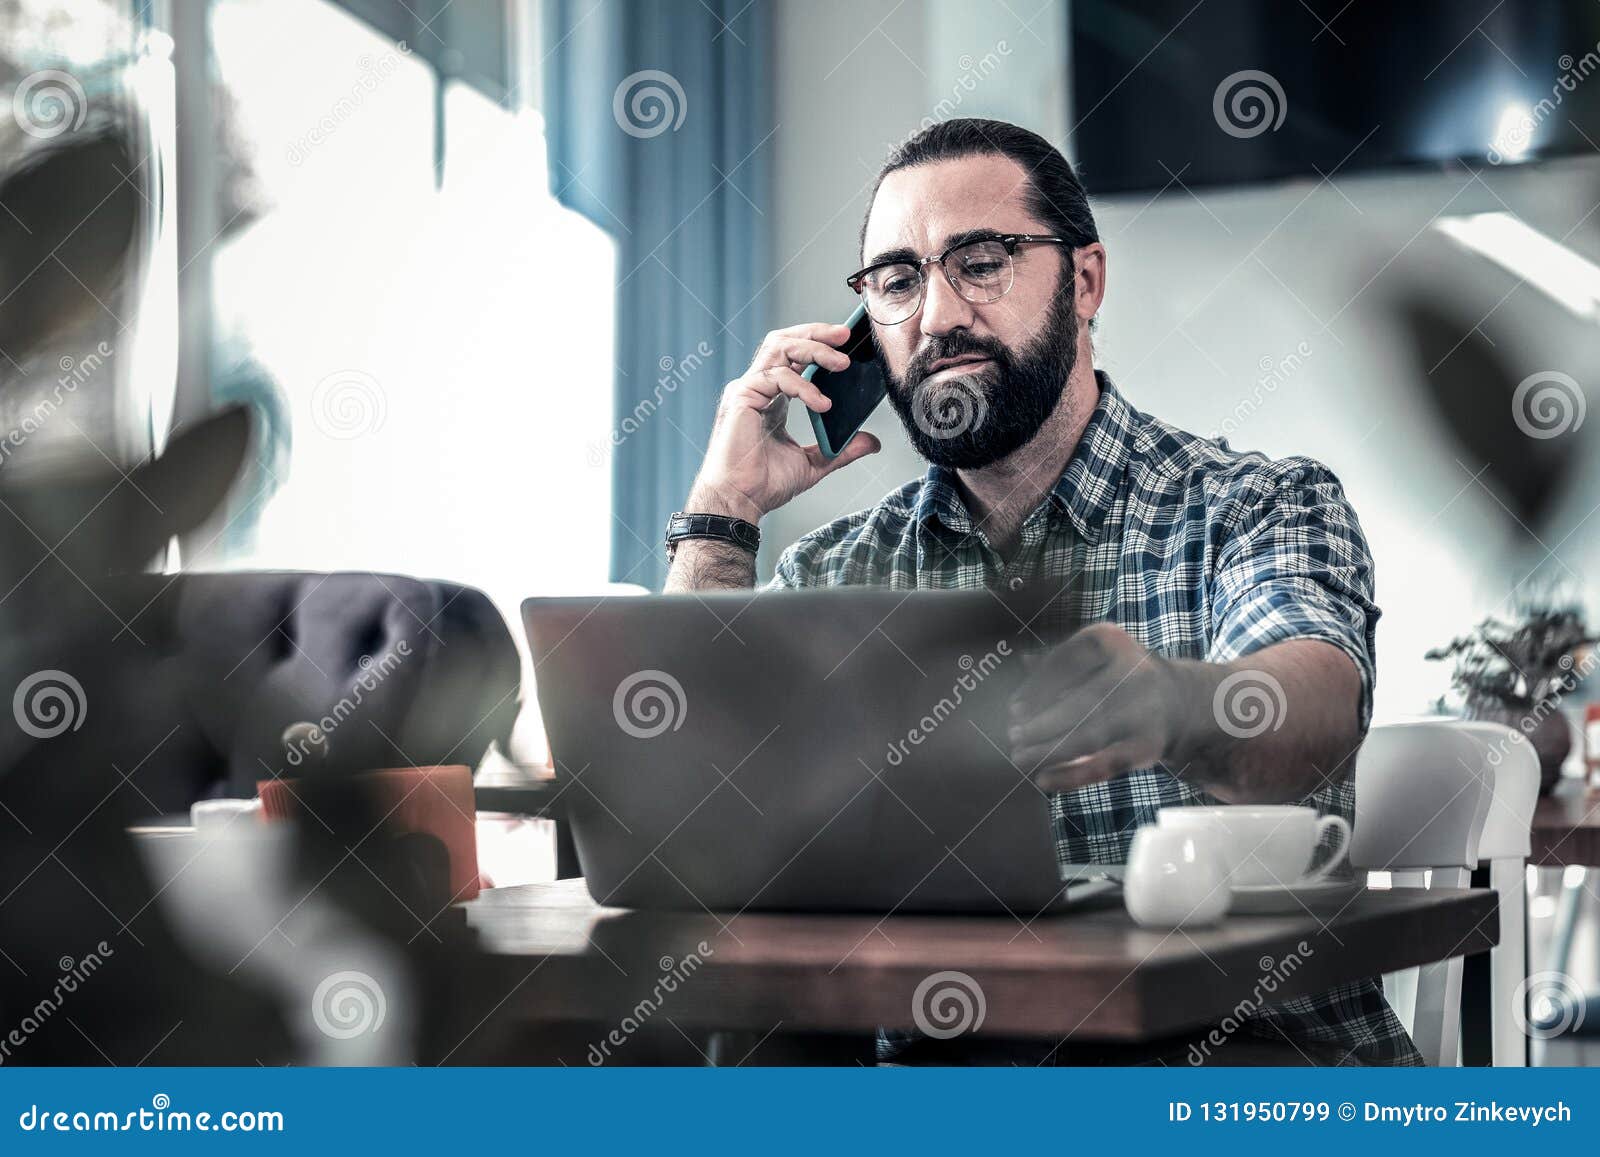 dark-haired freelance writer calling his colleague working remotely